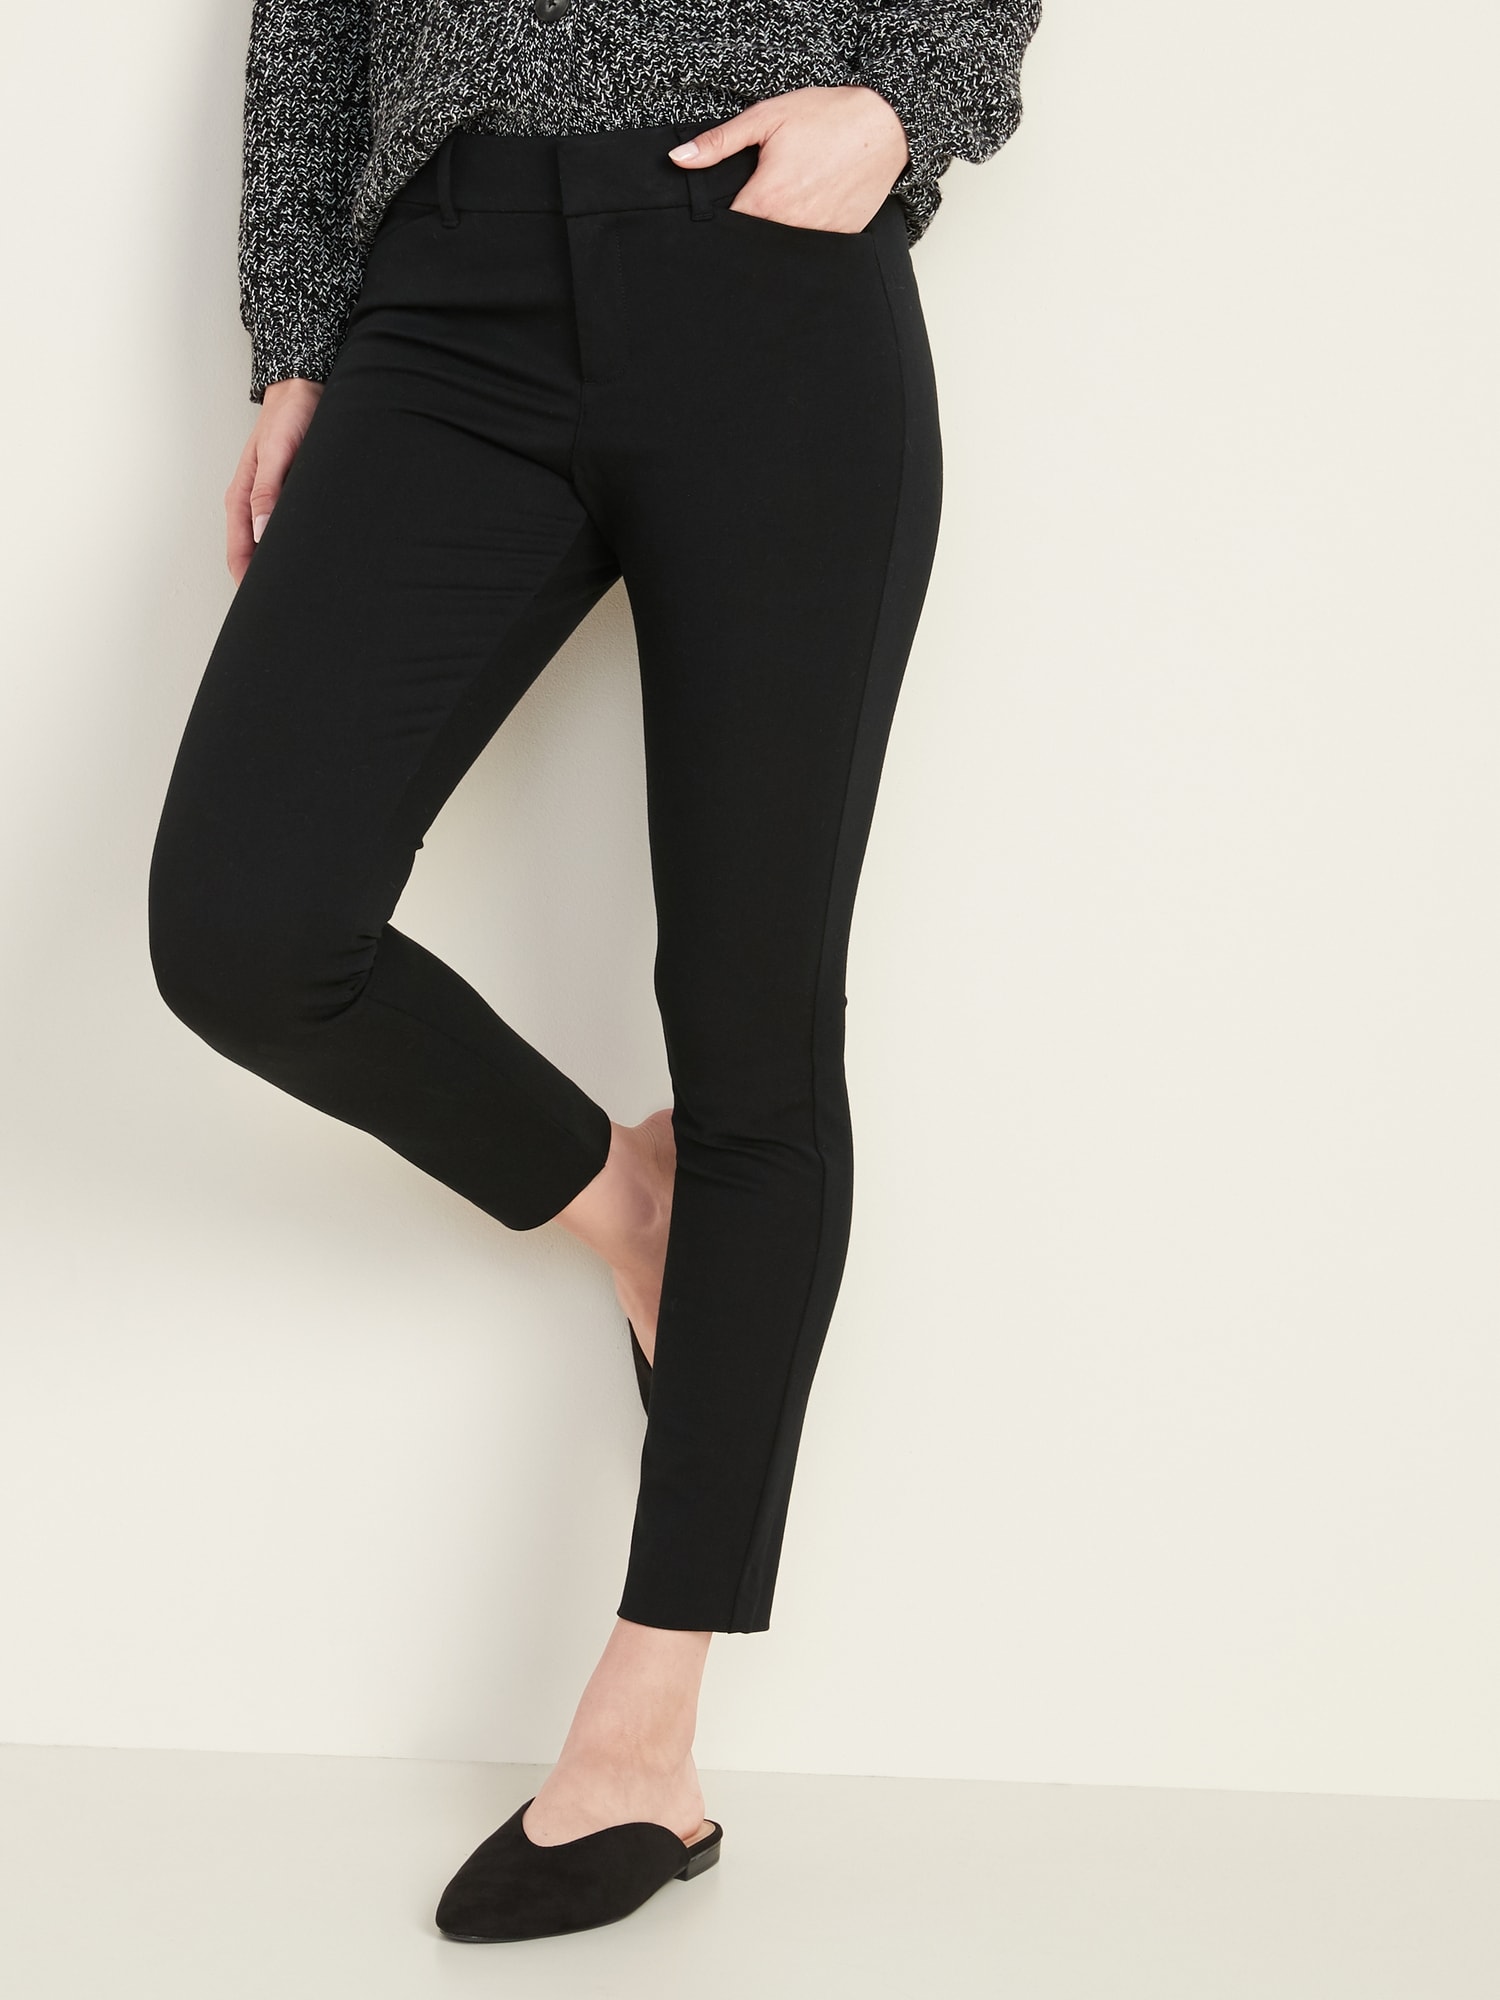 All-New Mid-Rise Pixie Ankle Pants for 